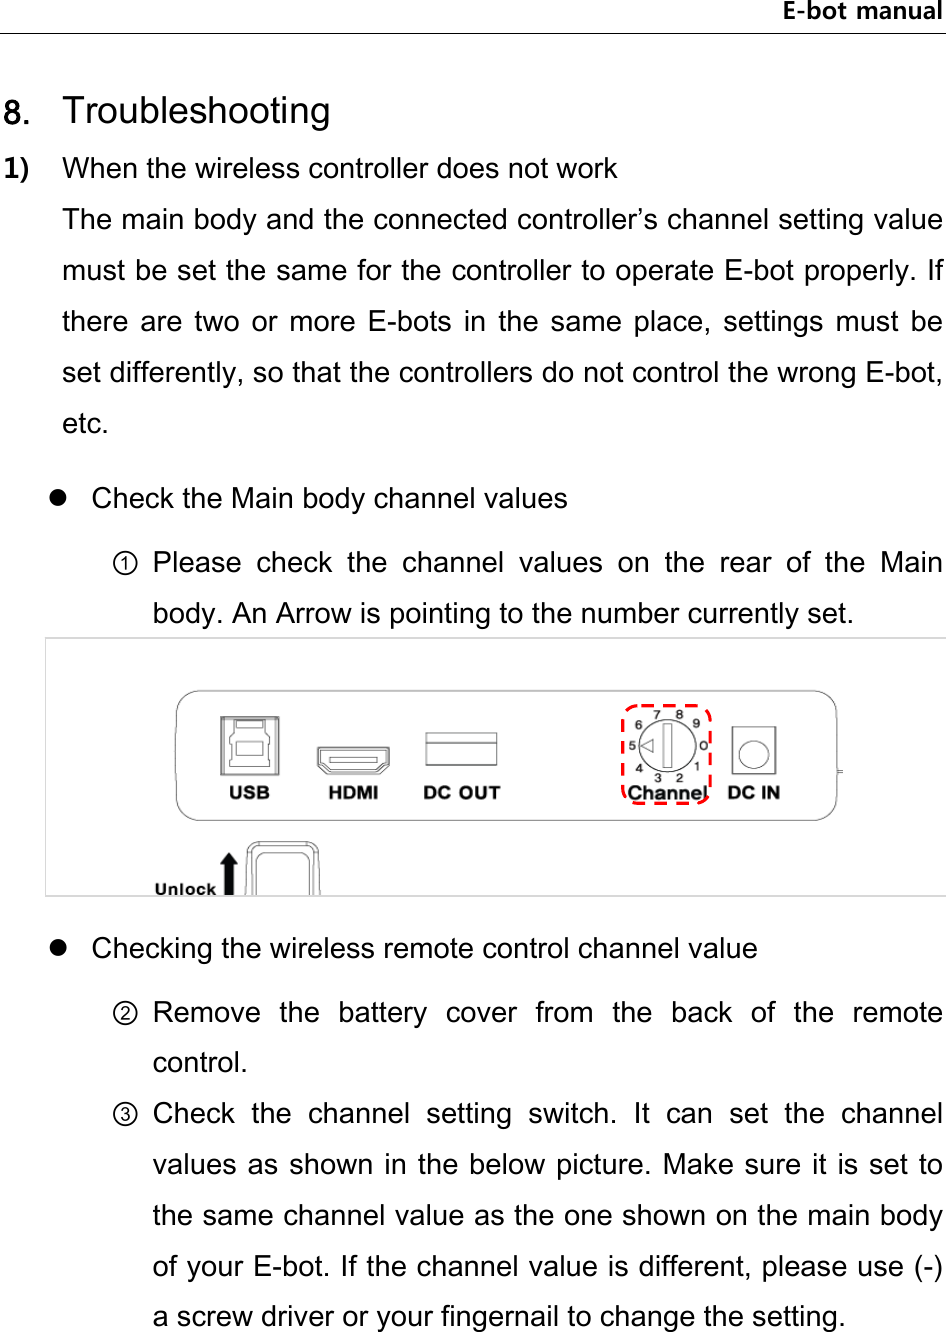 E-bot manual 8. Troubleshooting 1) When the wireless controller does not work The main body and the connected controller’s channel setting value must be set the same for the controller to operate E-bot properly. If there  are  two  or  more  E-bots  in  the  same  place,  settings  must  be set differently, so that the controllers do not control the wrong E-bot, etc.    Check the Main body channel values ① Please  check  the  channel  values  on  the  rear  of  the  Main body. An Arrow is pointing to the number currently set.   Checking the wireless remote control channel value ② Remove  the  battery  cover  from  the  back  of  the  remote control. ③ Check  the  channel  setting  switch.  It  can  set  the  channel values as shown in the below picture. Make sure it is set to the same channel value as the one shown on the main body of your E-bot. If the channel value is different, please use (-) a screw driver or your fingernail to change the setting. 